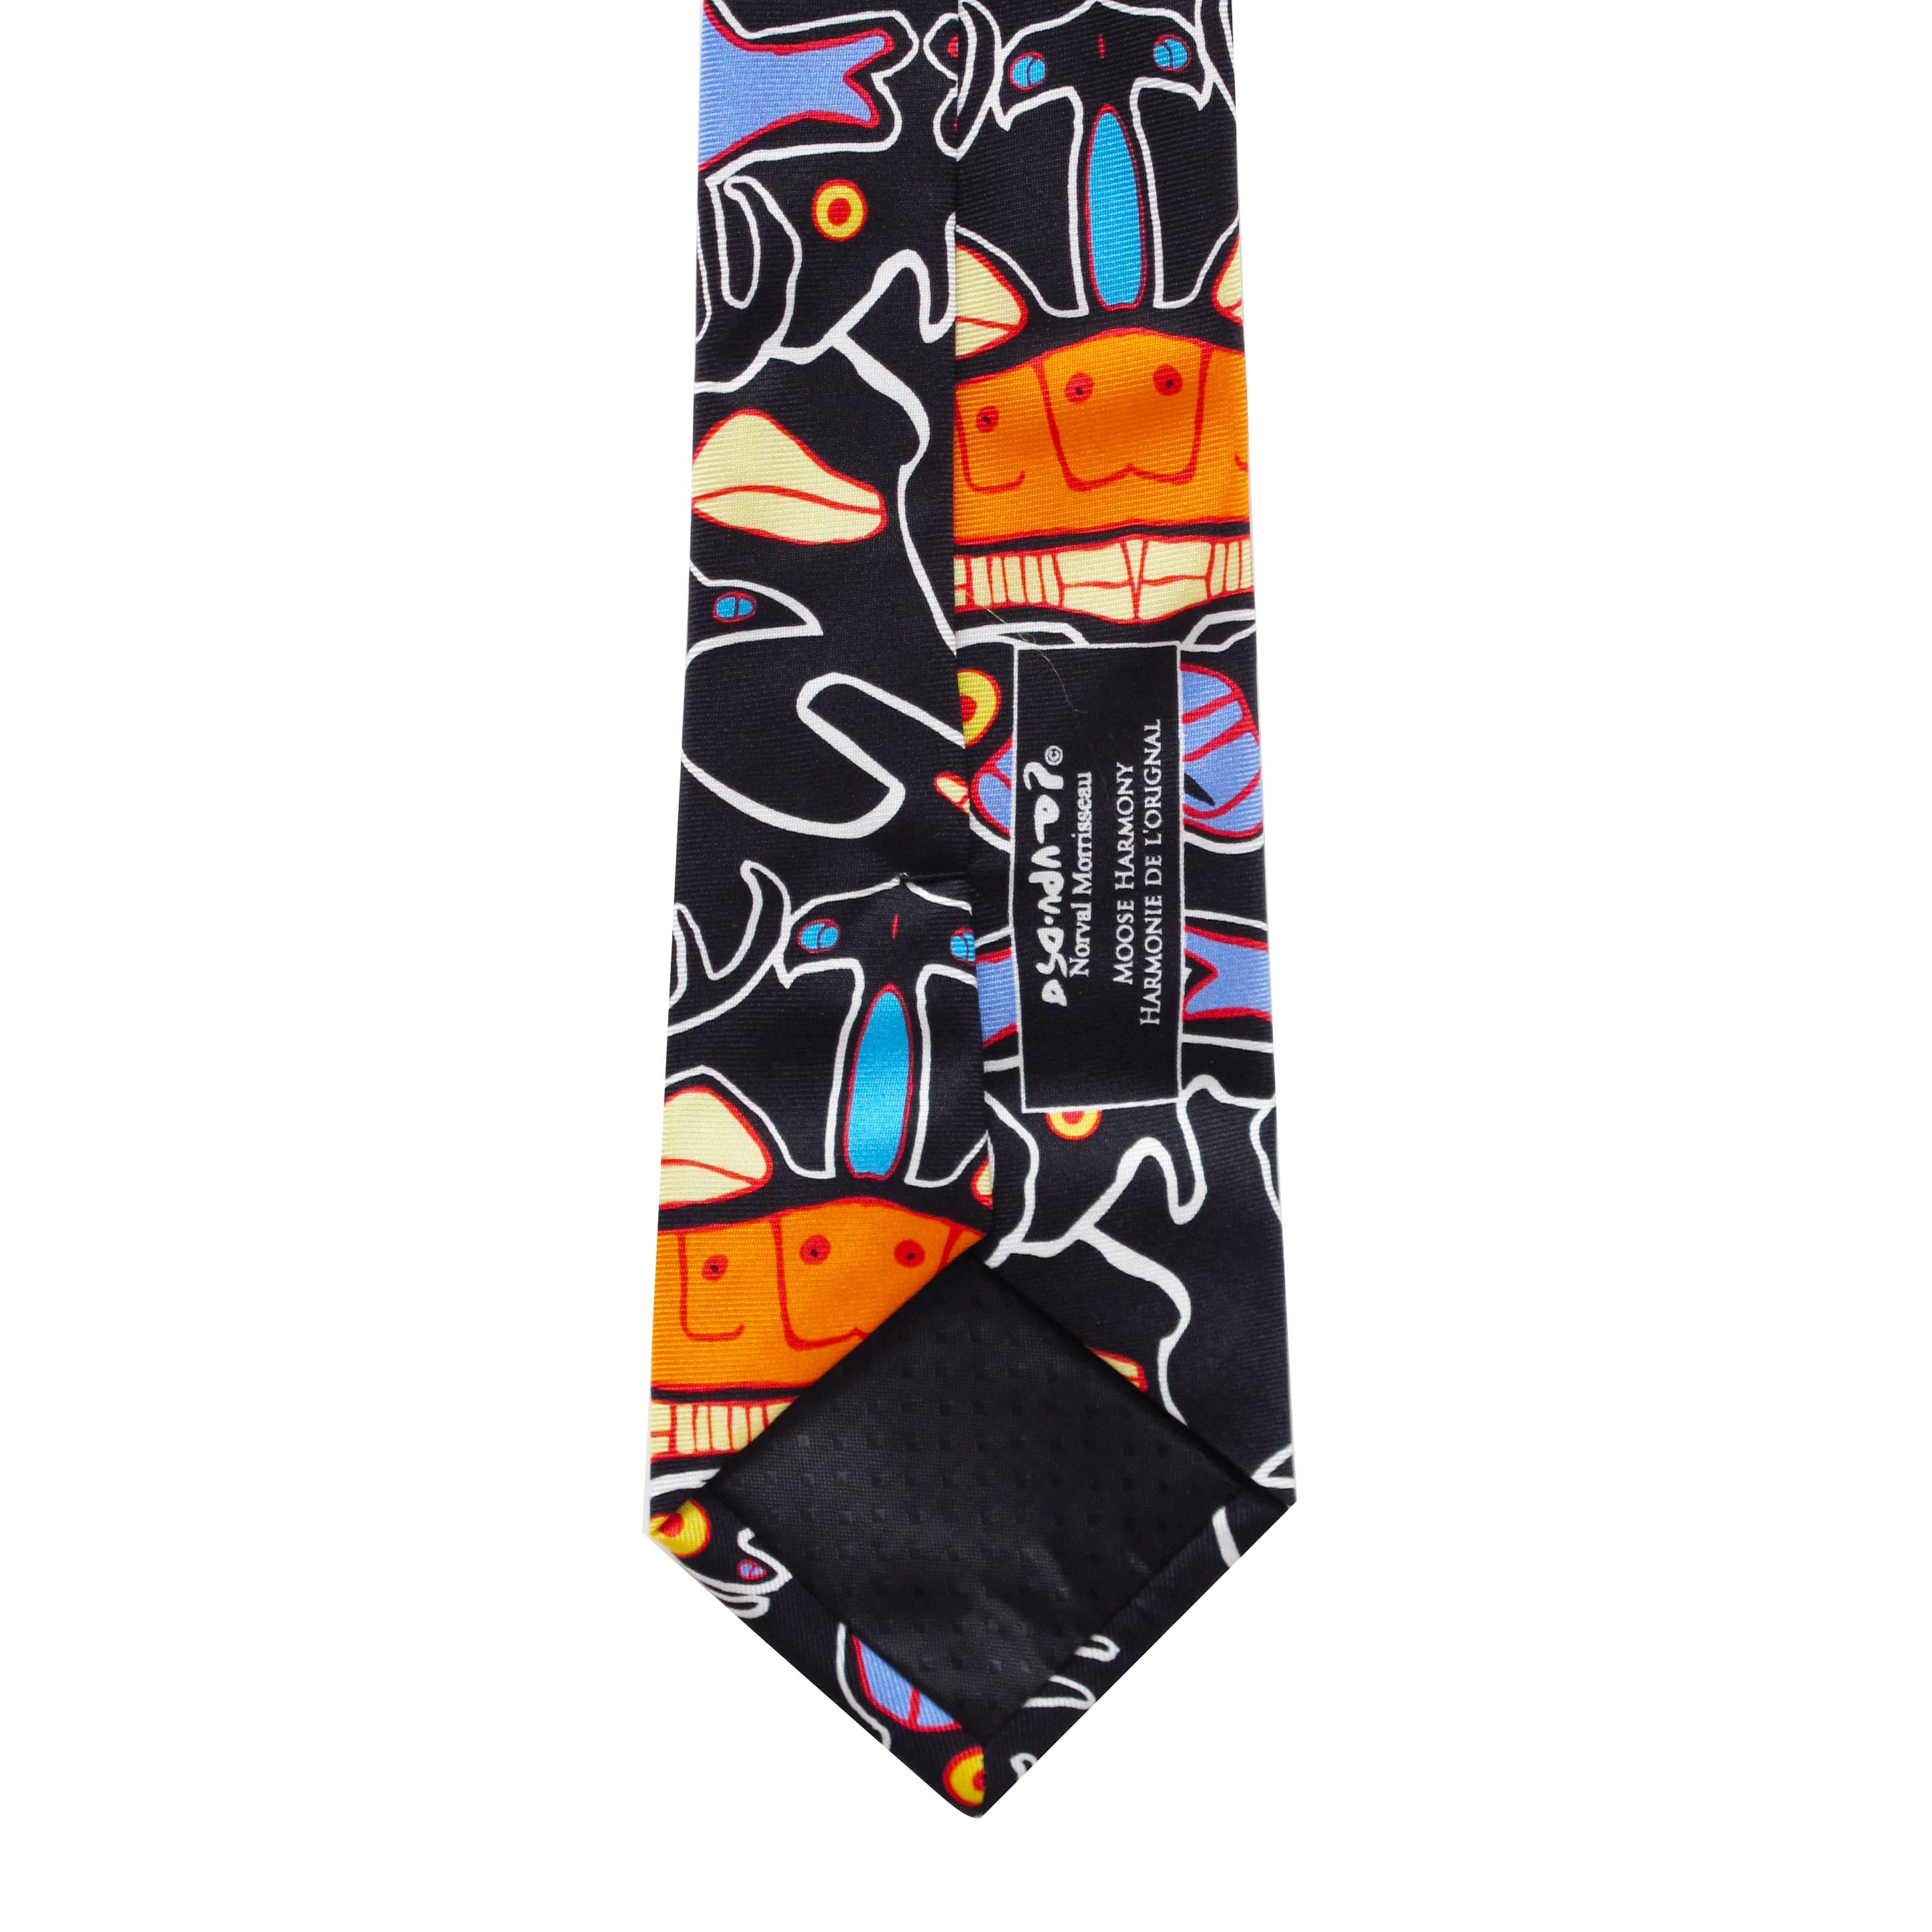 Norval Morrisseau Moose Harmony Artist Design Silk Tie - Out of Stock